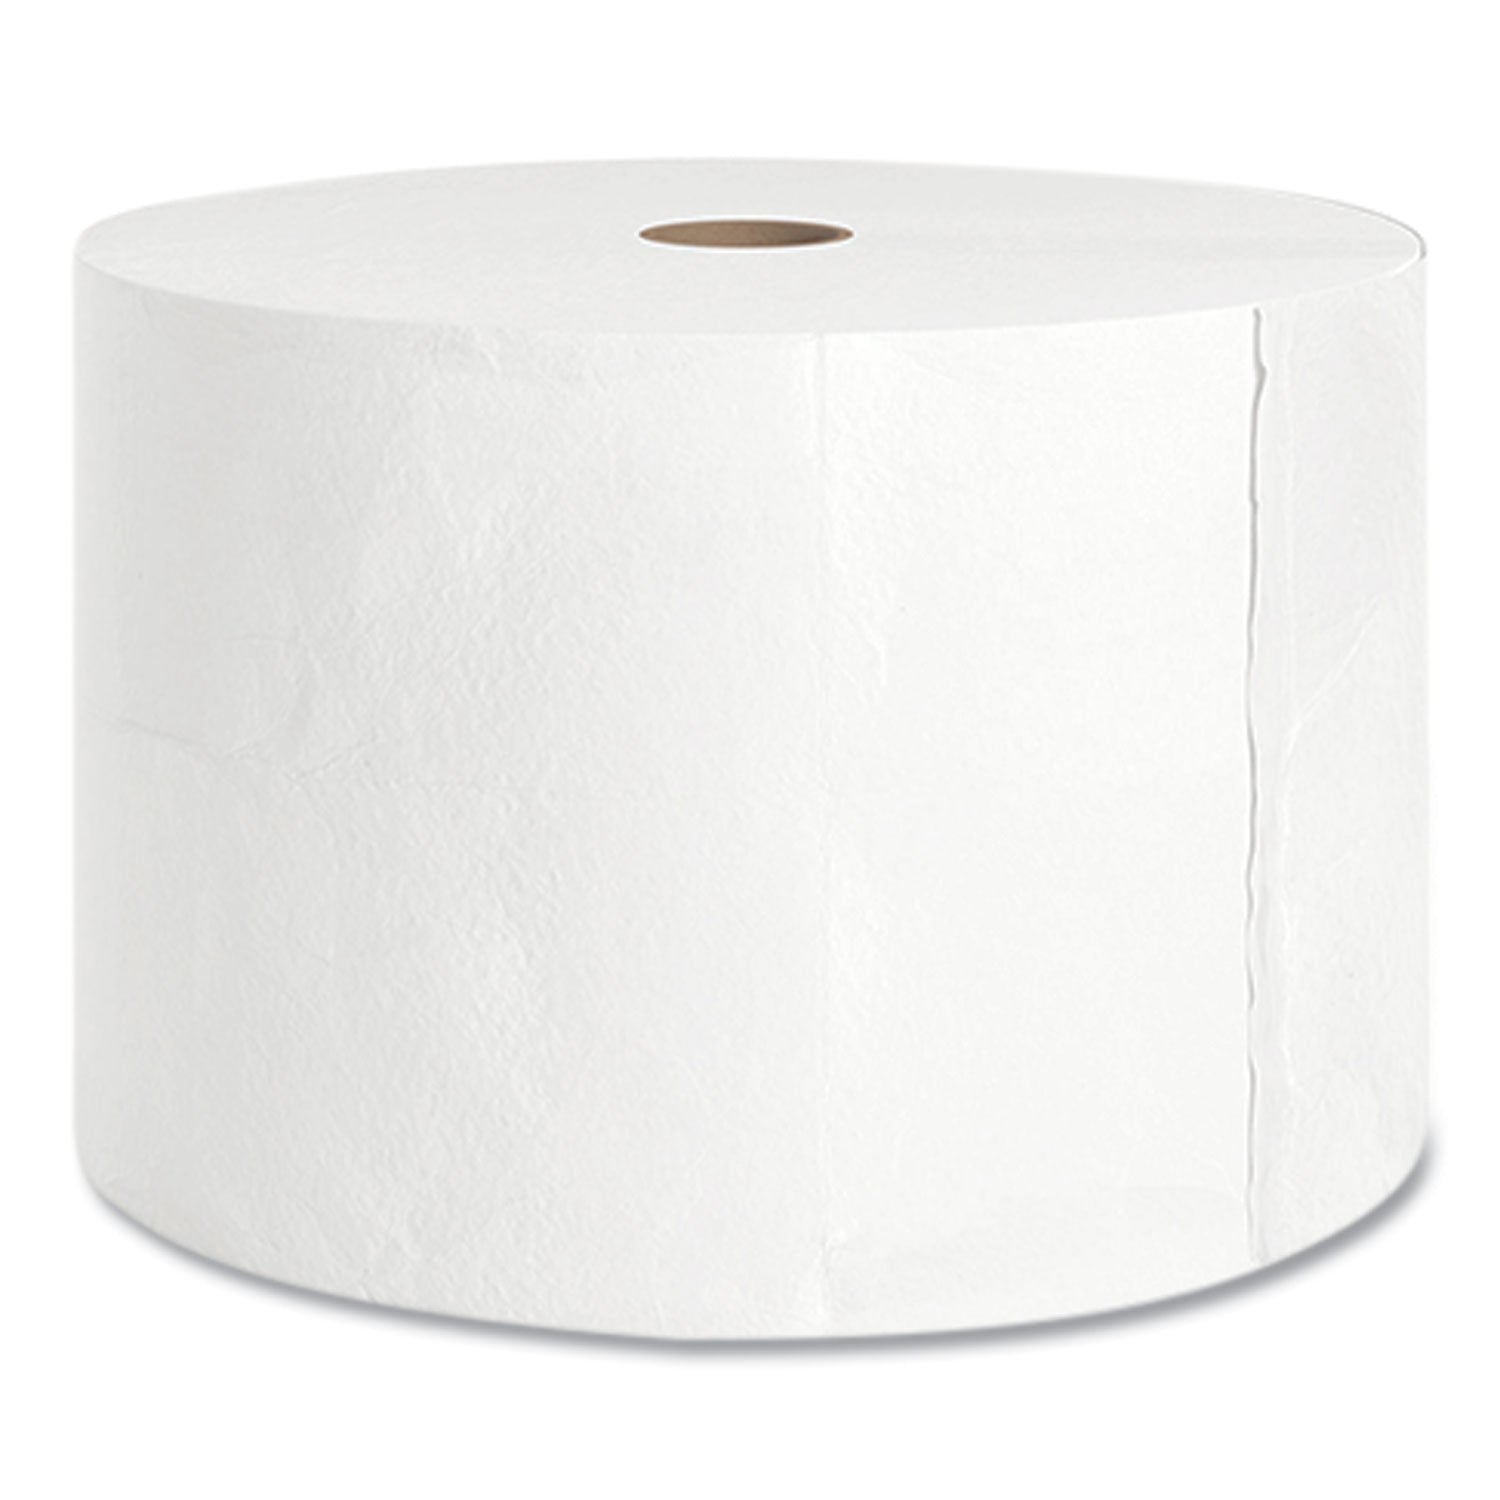 j-series-2-ply-small-core-bath-tissue-septic-safe-white-1000-sheets-roll-36-rolls-carton_cwz24405974 - 3